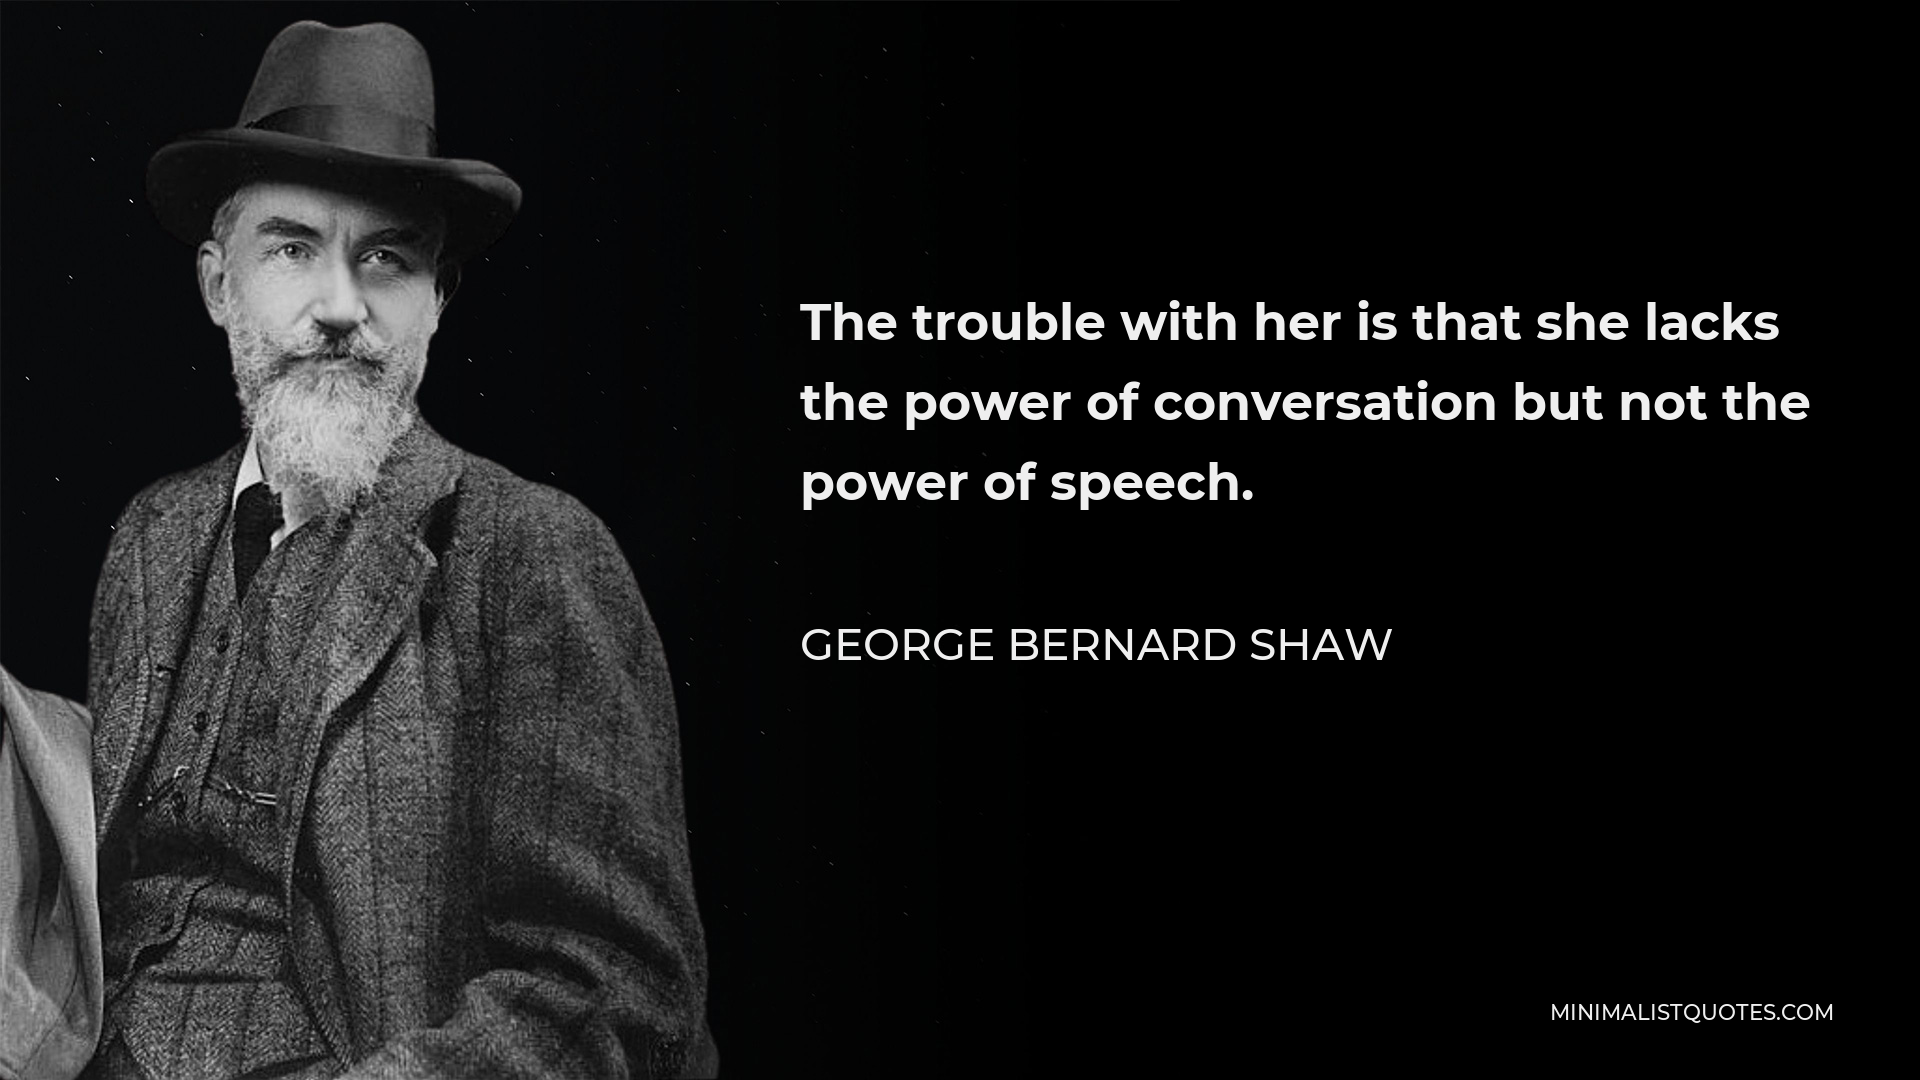 George Bernard Shaw Quote - The trouble with her is that she lacks the power of conversation but not the power of speech.